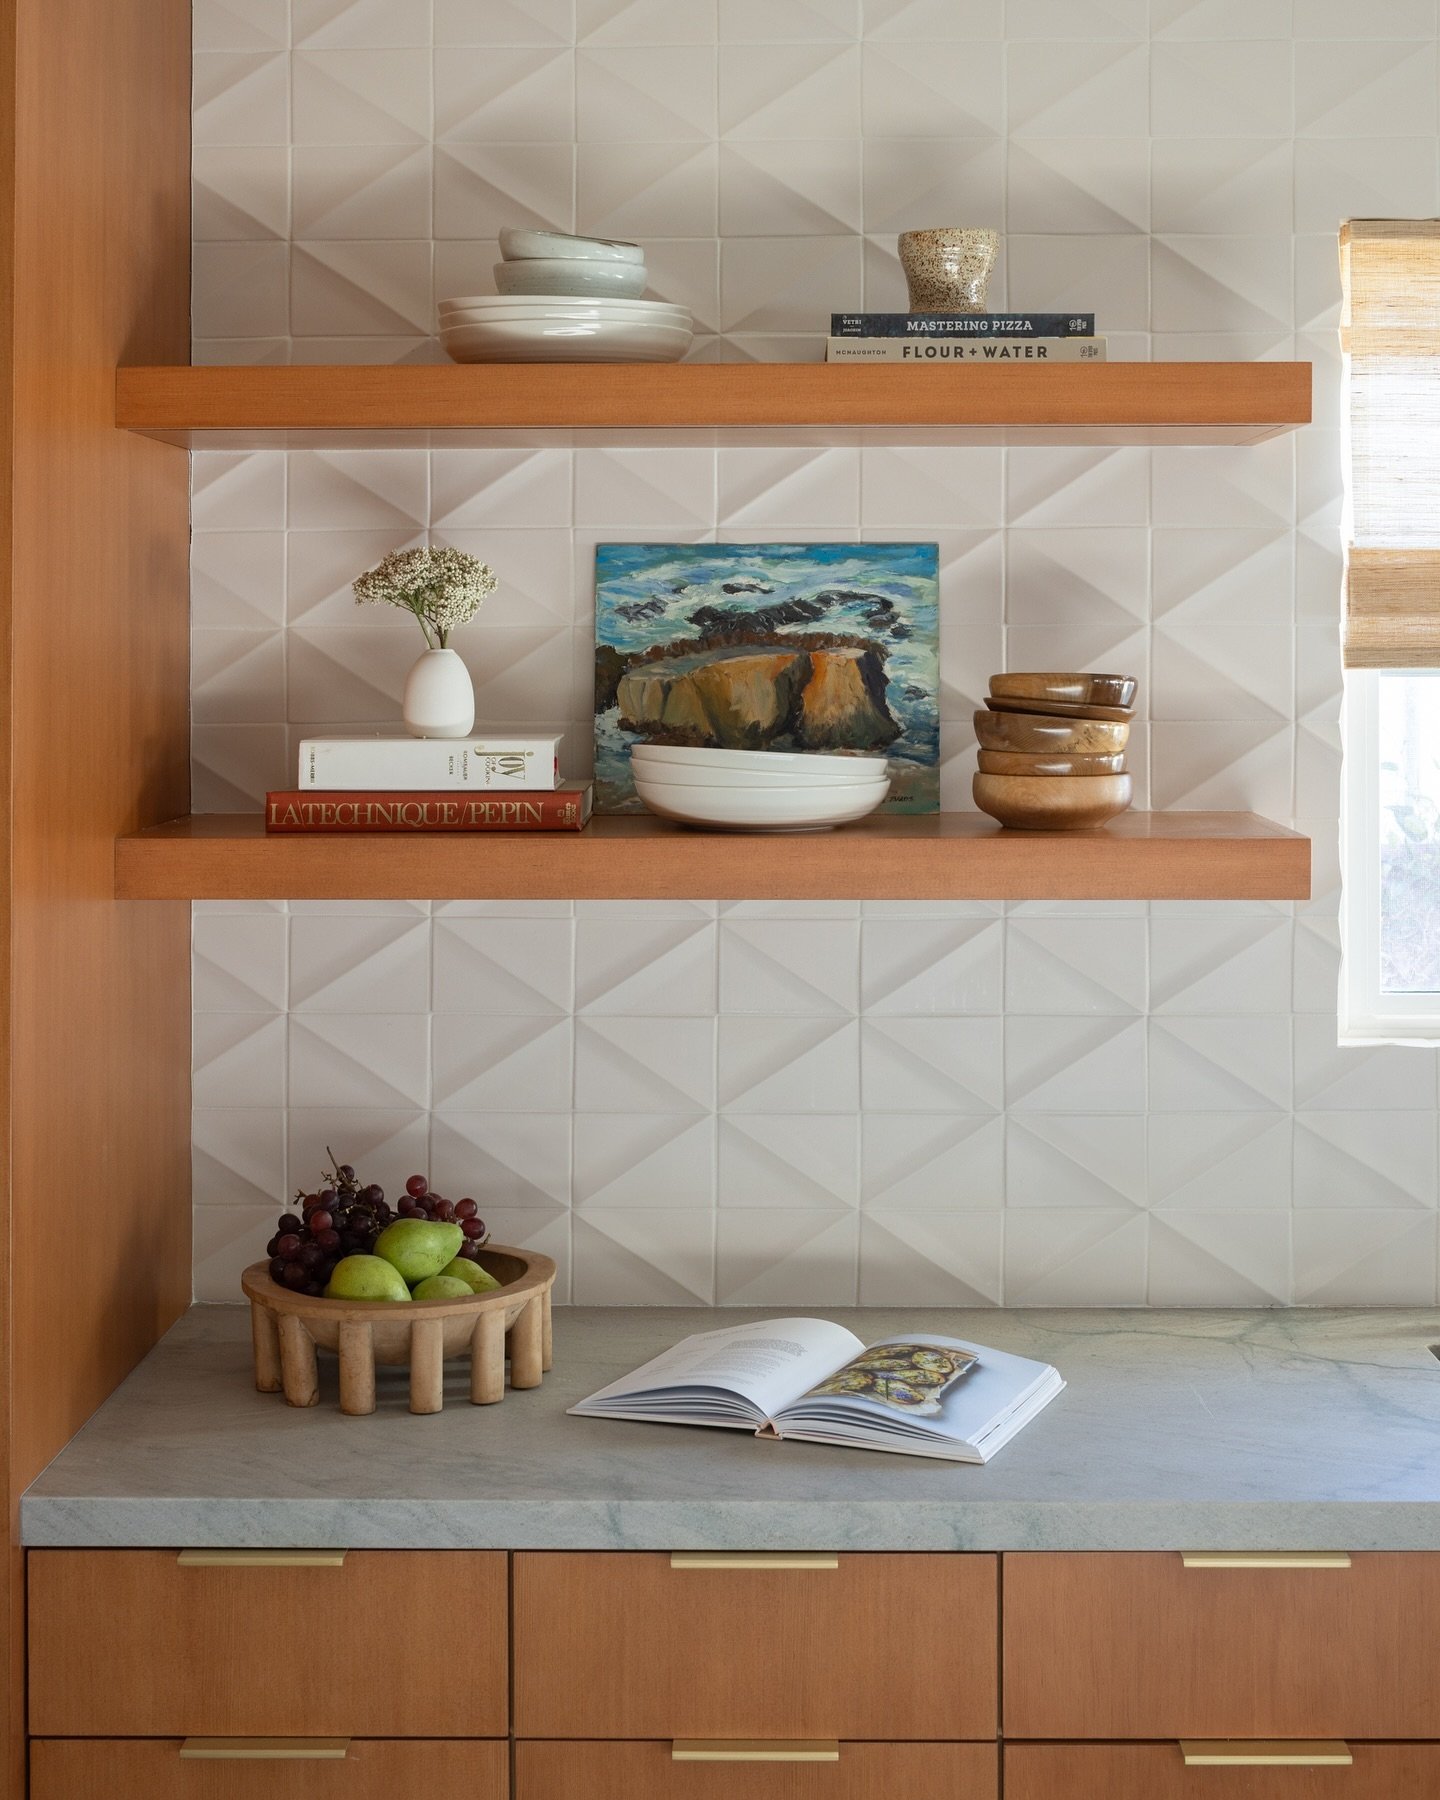 The daily used shelves is a great example that reflects the openness and effect of the remodeled space. #sundayshelfie at our Point Loma Bungalow project. 

Design | @kerimichelleinteriors 
Build | @sanmarcoswoodproducts 
Photography | @naderessaphot